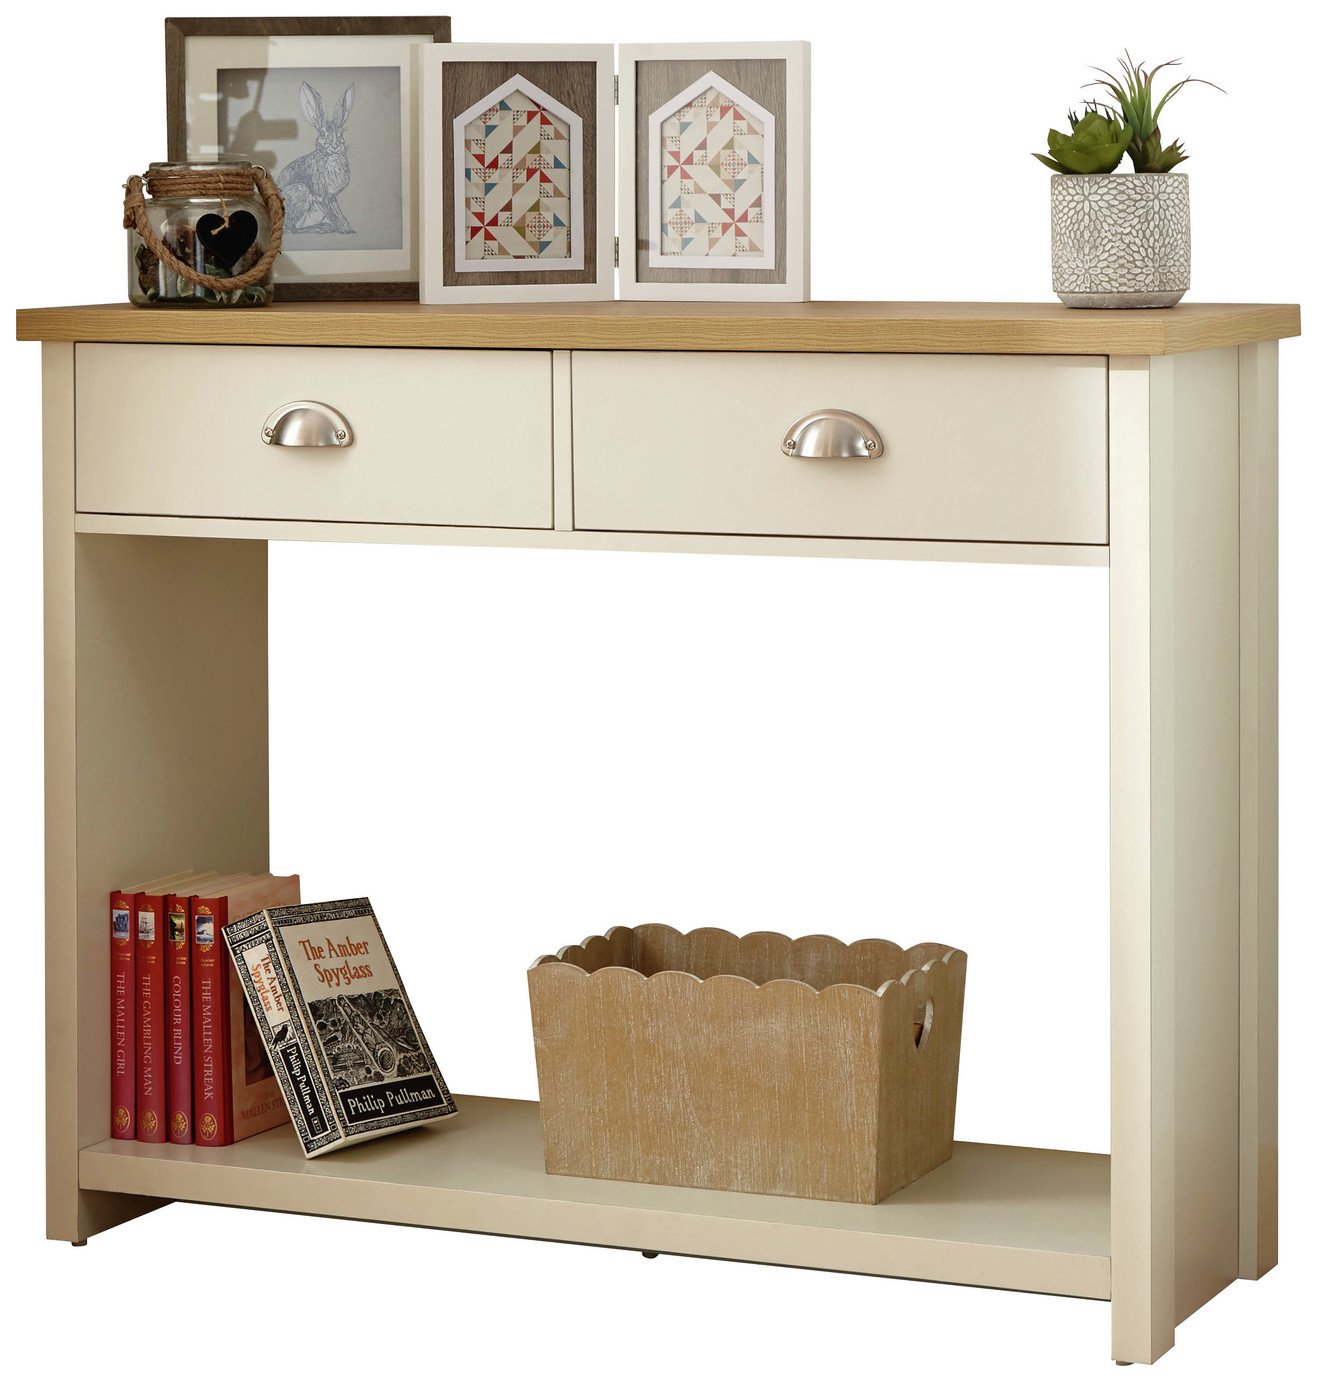 GFW Lancaster 2 Drawer Console Table - Cream